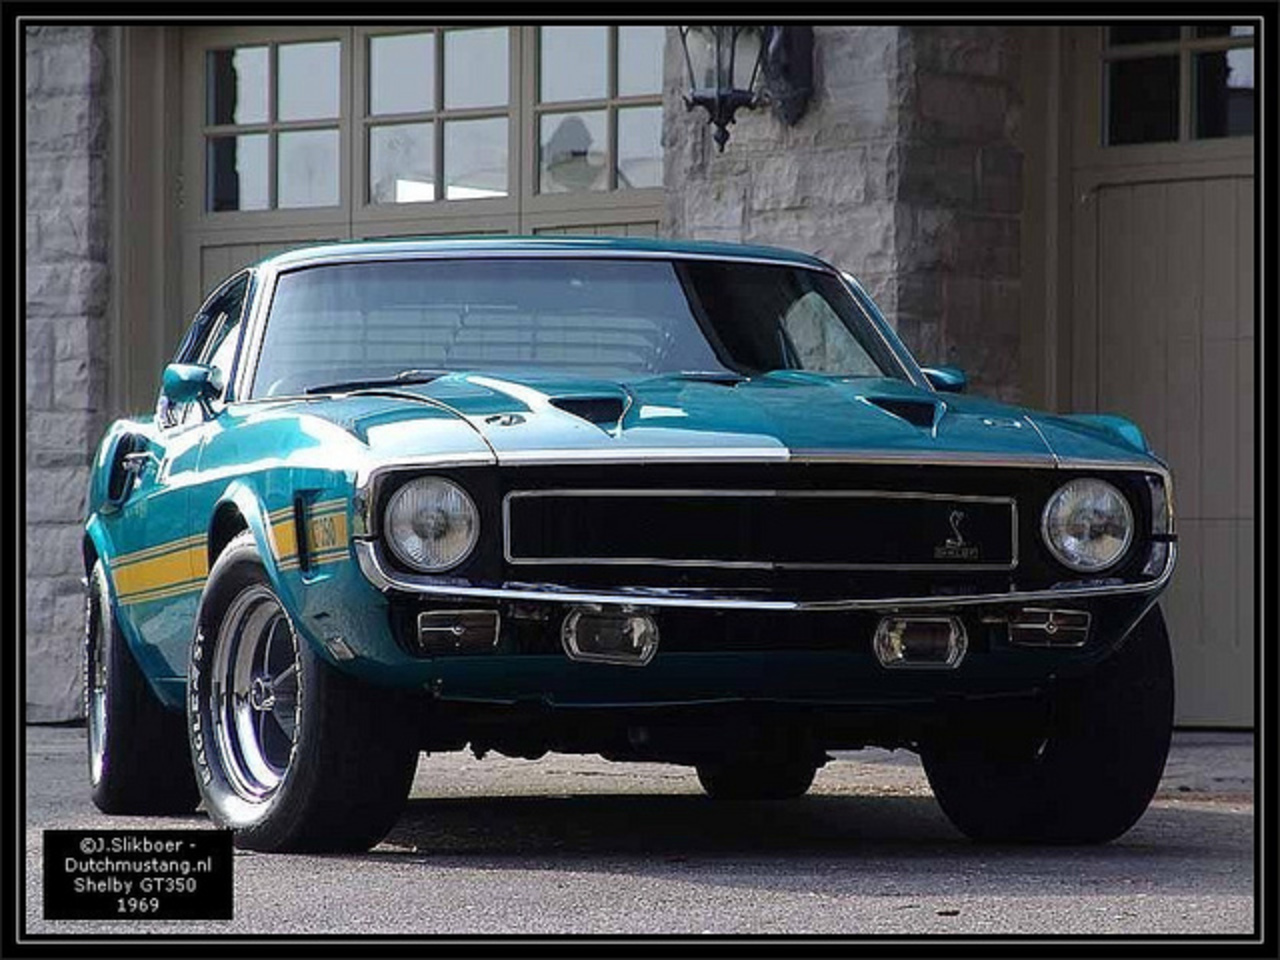 Ford Mustang Shelby GT350-001 1969 / Flickr - Partage de photos!